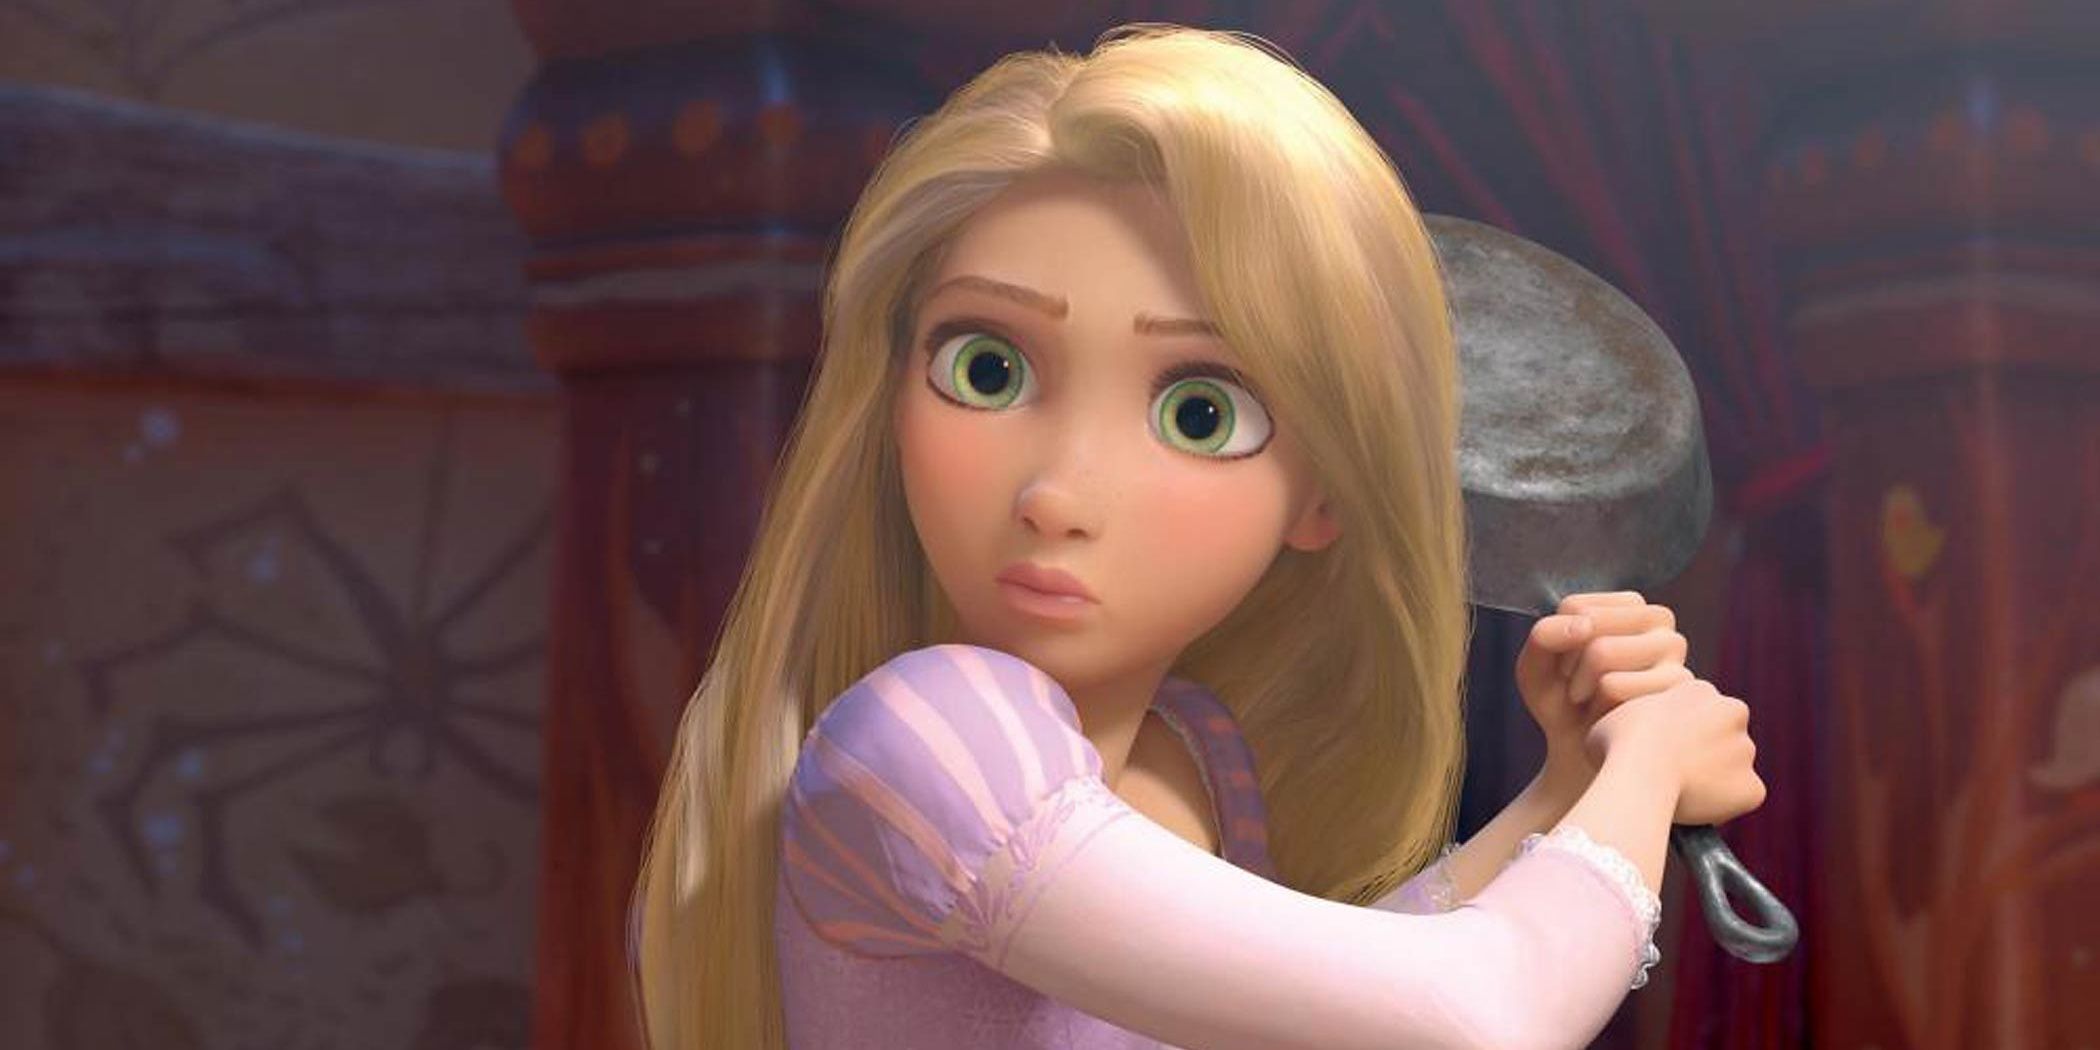 5 Ways Tangled Is Better Than Brave (& 5 Why Brave Is)